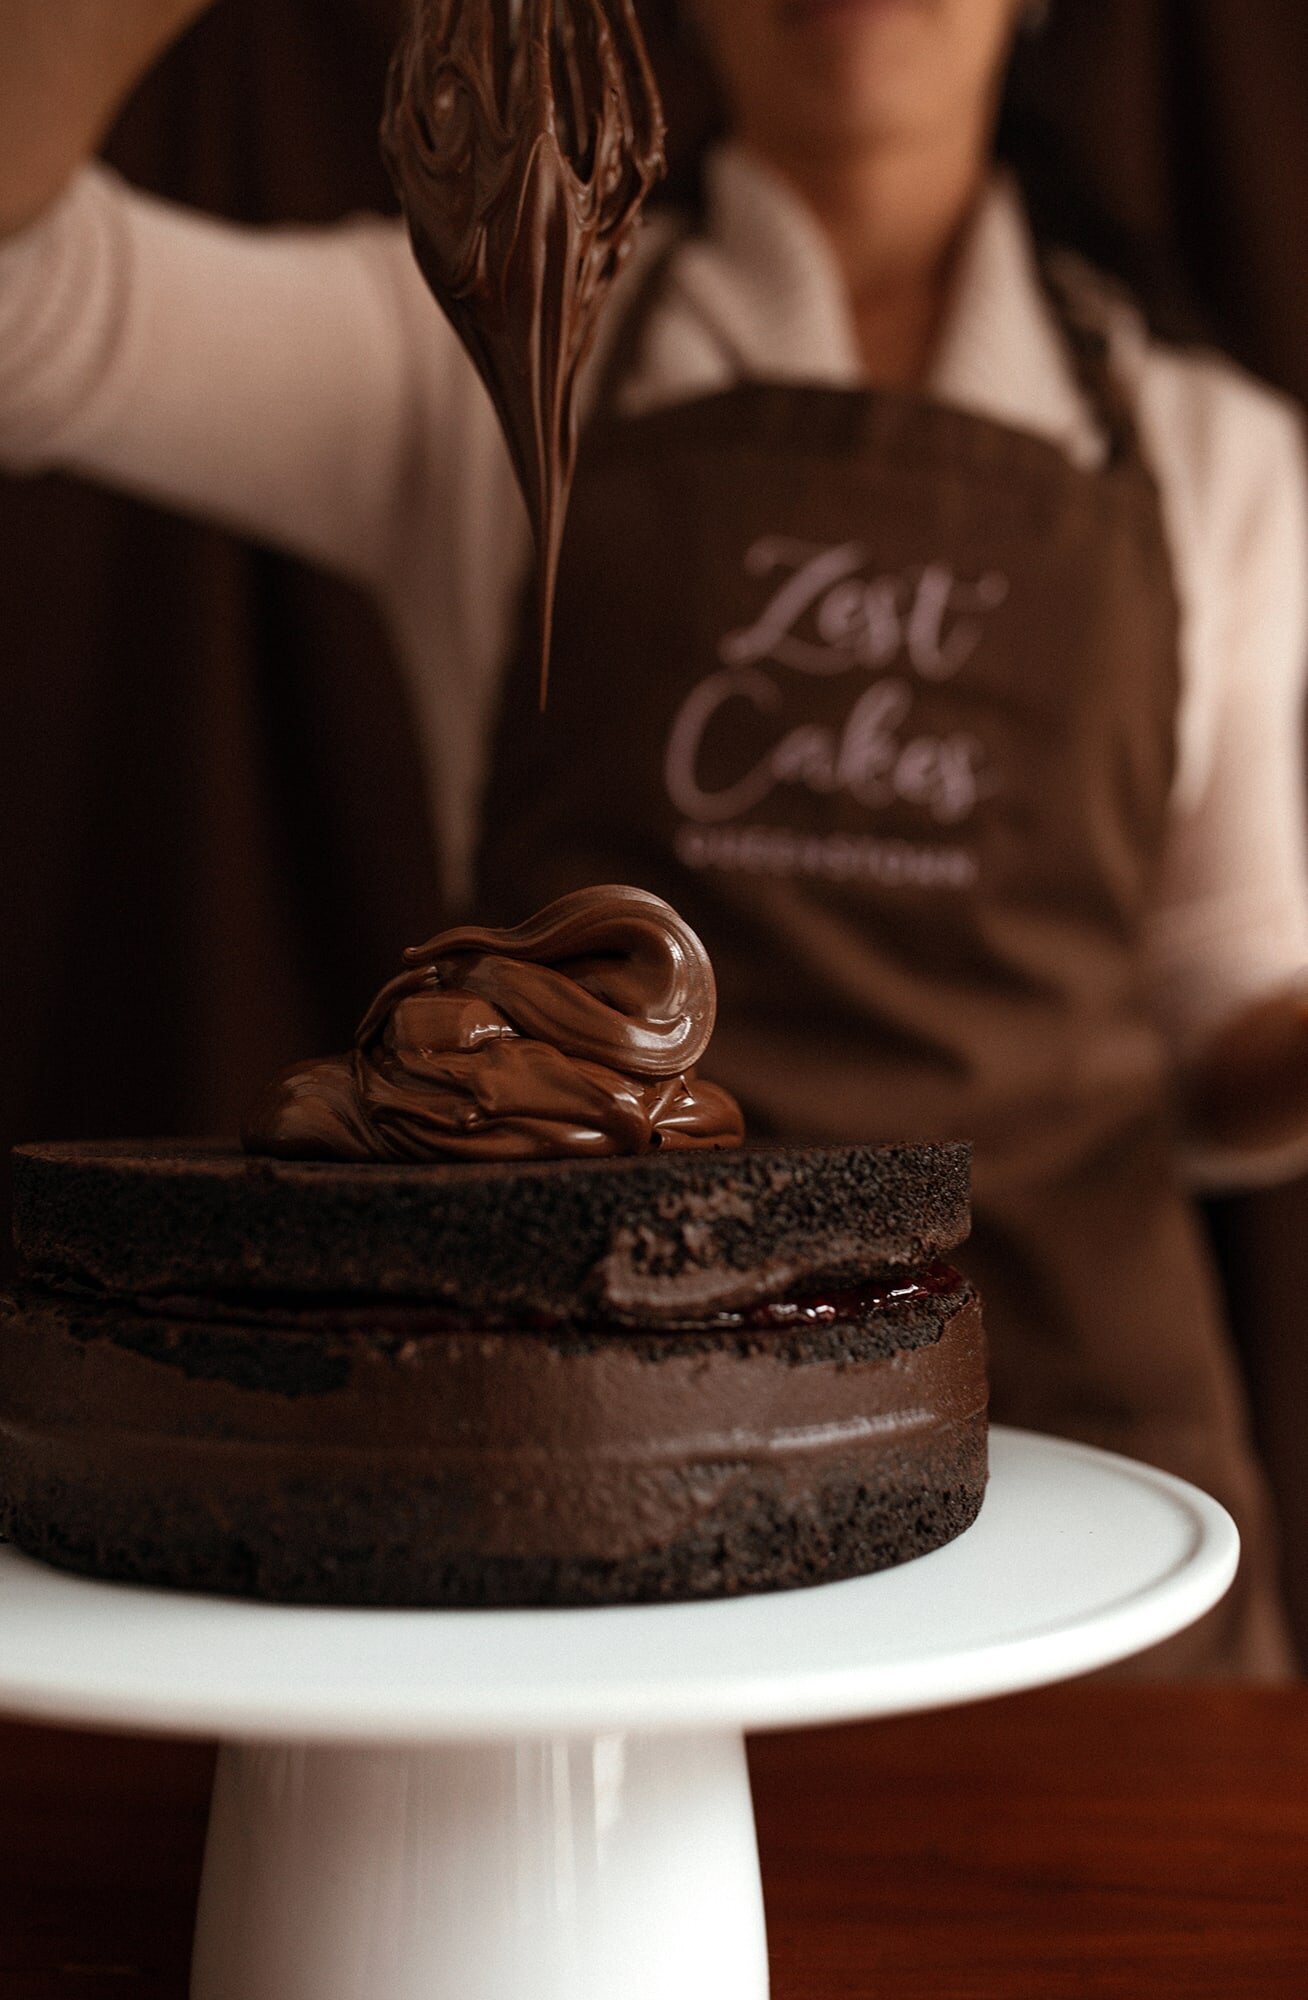 Zest-Cakes-Food-Photography